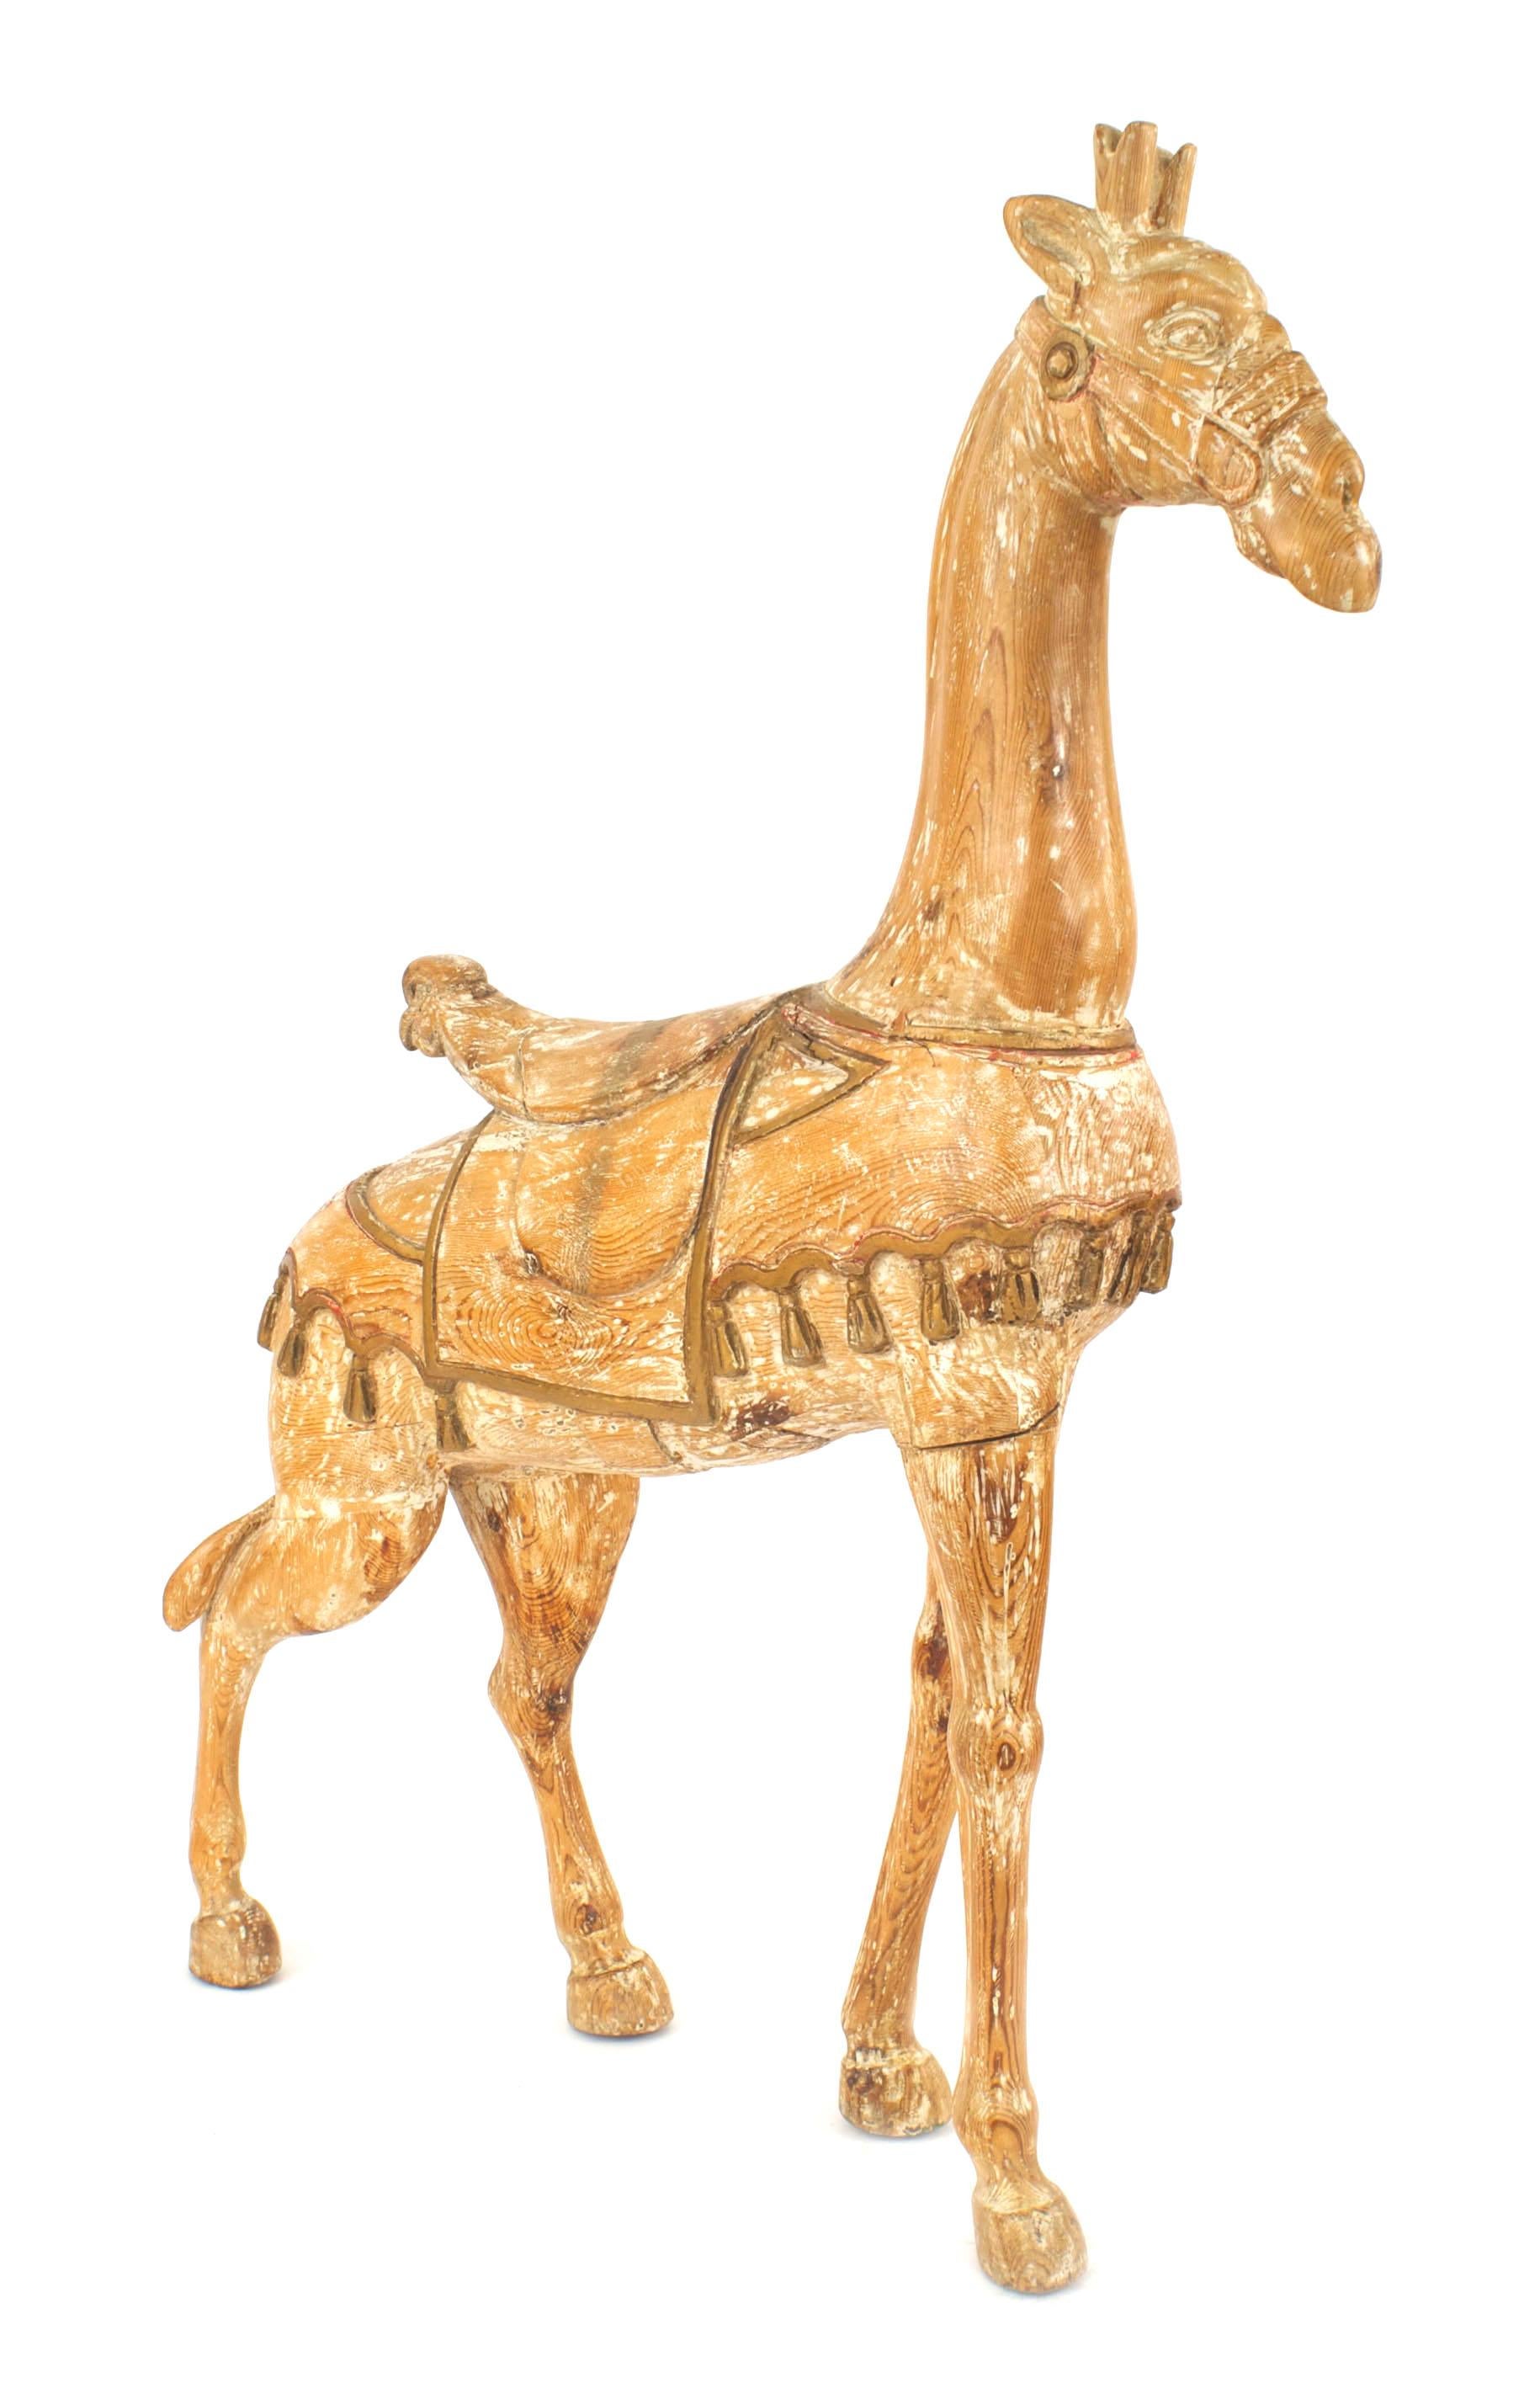 American carousel style (20th Cent) of stripped pine large giraffe figure with gold trim and wearing a saddle
